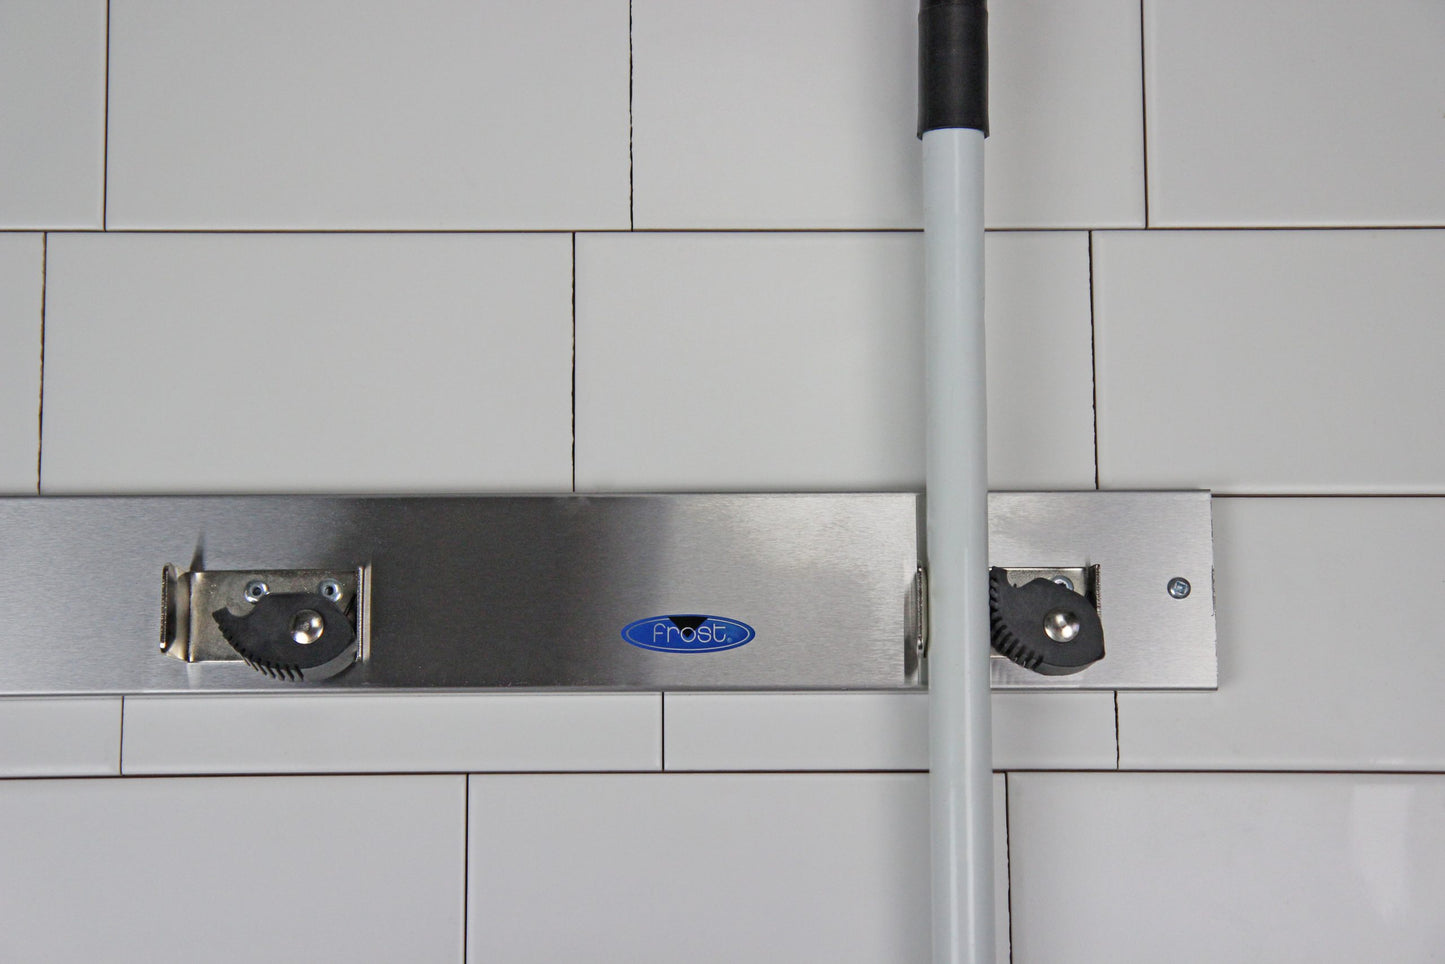 Frost Stainless Steel Mop Holder in use